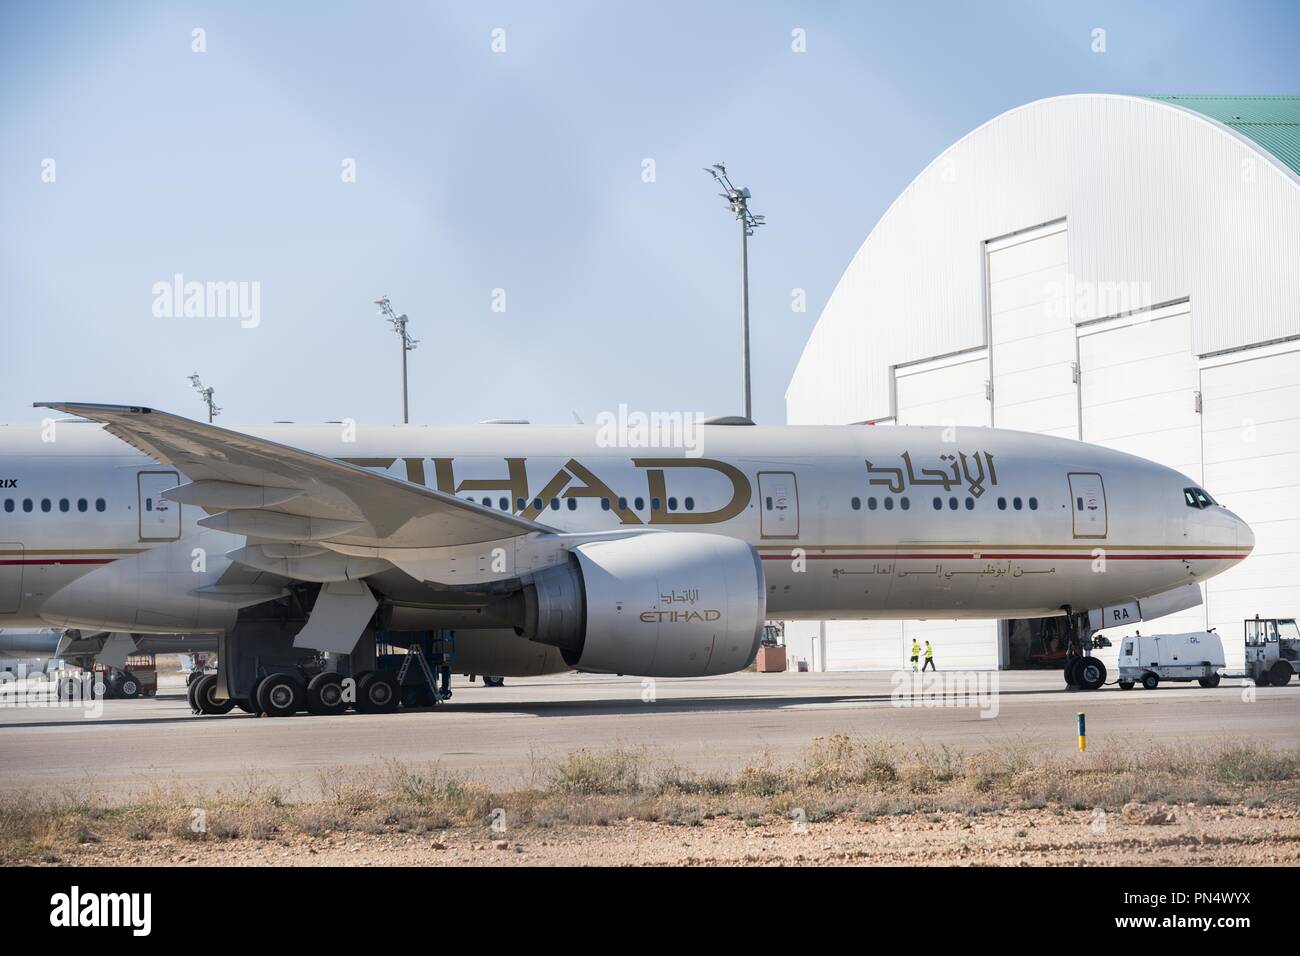 An Etihad airline boeing 777 aircraft seen parked at Teruel airport. Many people think Teruel airportis an aircraft graveyard where aircrafts go through their final journey and have their metal recycled. In fact this airport located in eastern Spain is more like a hotel for aircrafts to take a long nap.  It hosts aircraft from all over the world that have been withdrawn from service, be it temporarily or permanently, and caters to their maintenance needs. Some are ready to fly but are waiting for financial or legal issues to be sorted out. Some are here because their airlines need to temporari Stock Photo